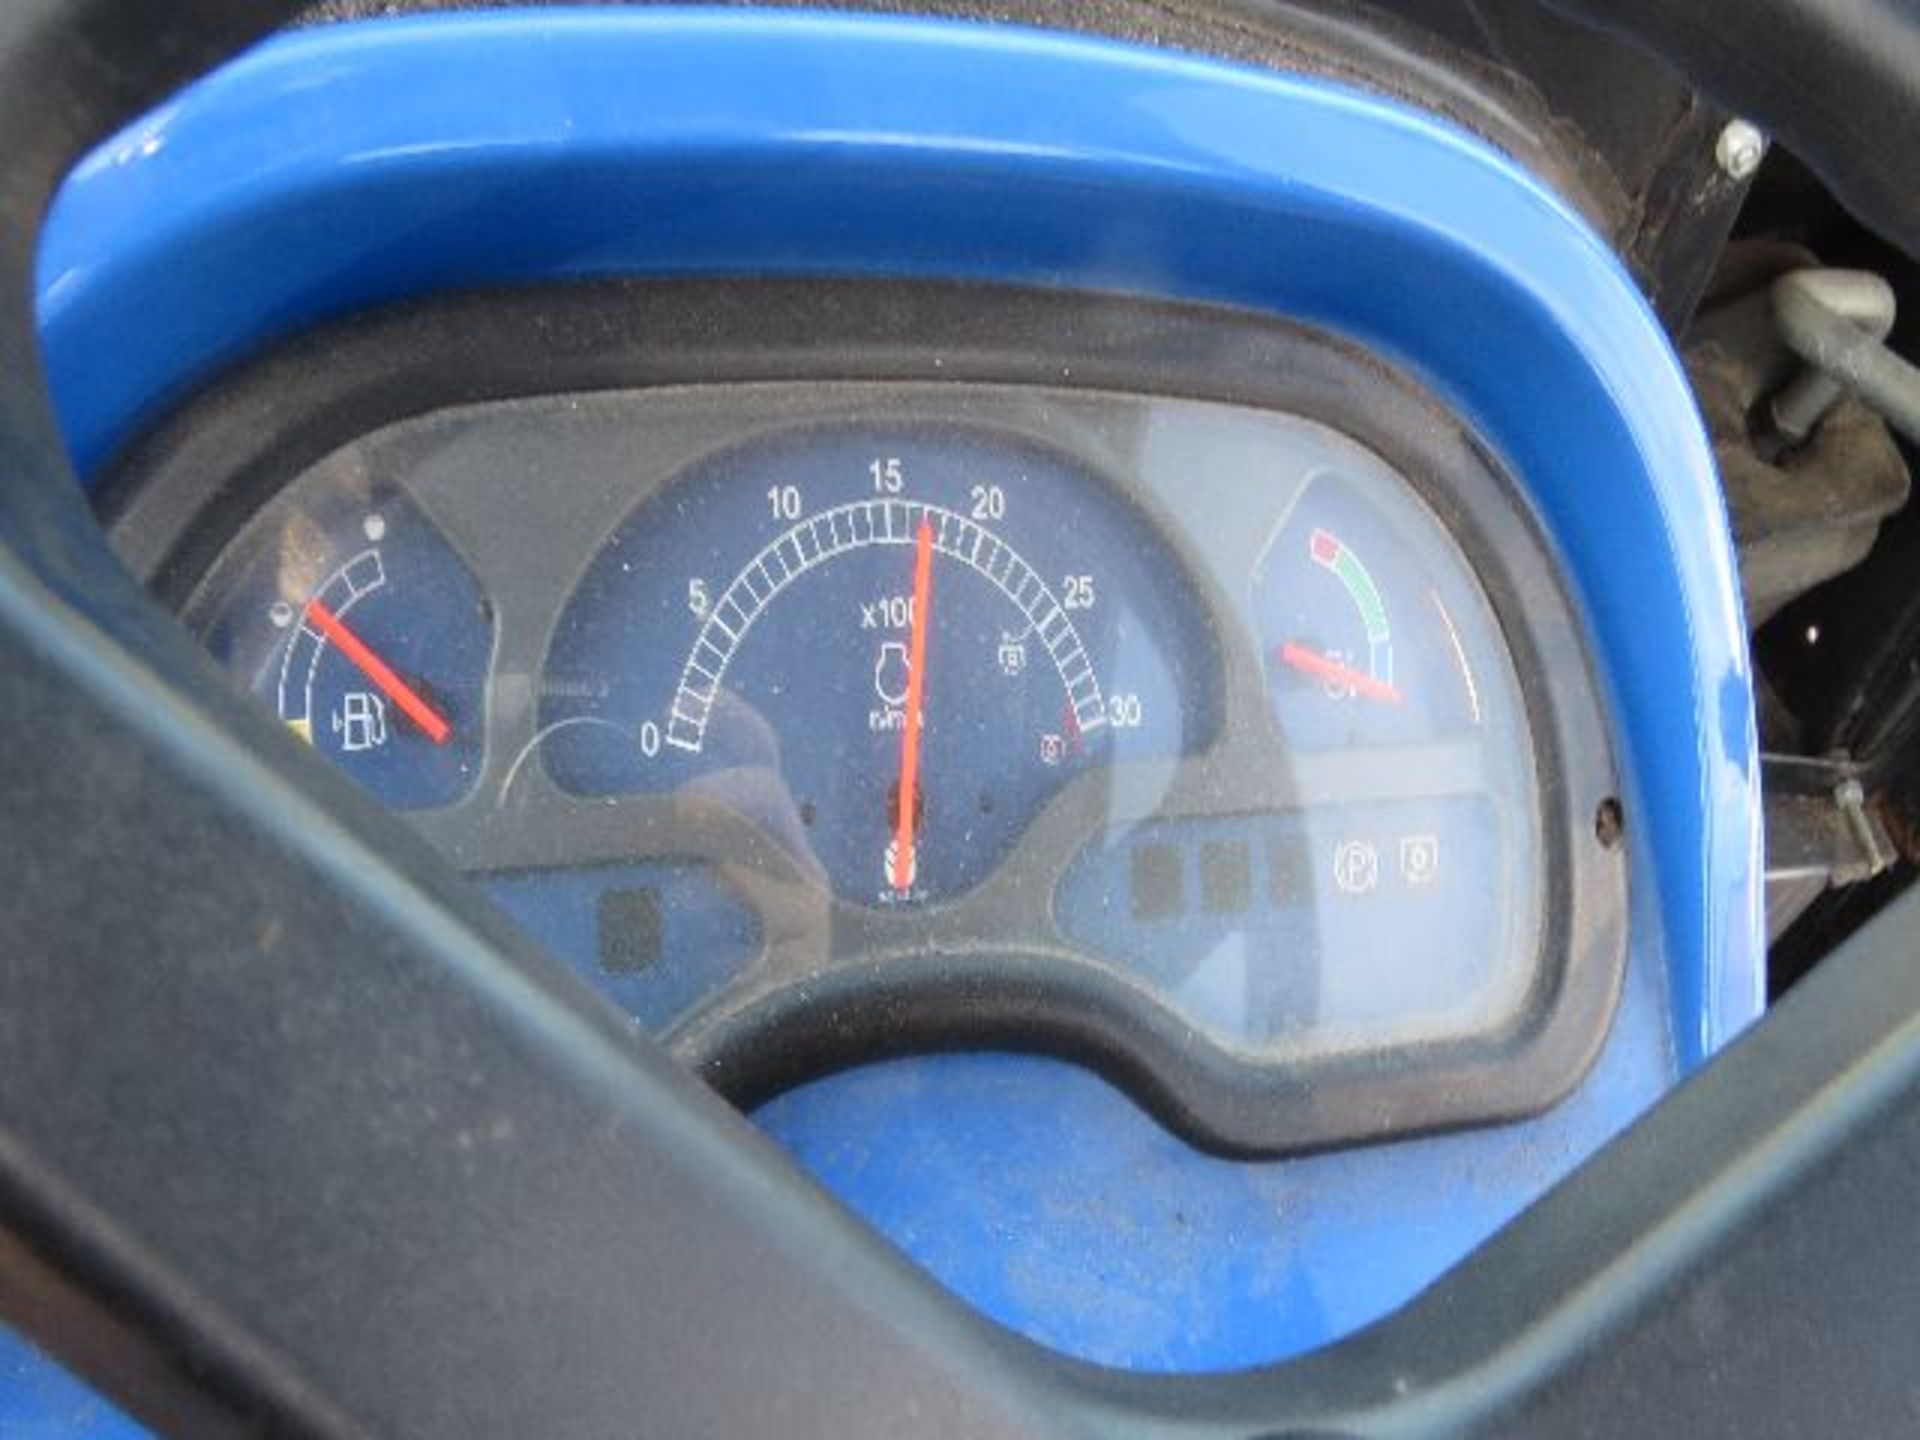 2004 New Holland model  TC24DA tractor, sn HG10183, 260 hrs. on meter, front wheel assist, cab, - Image 6 of 9